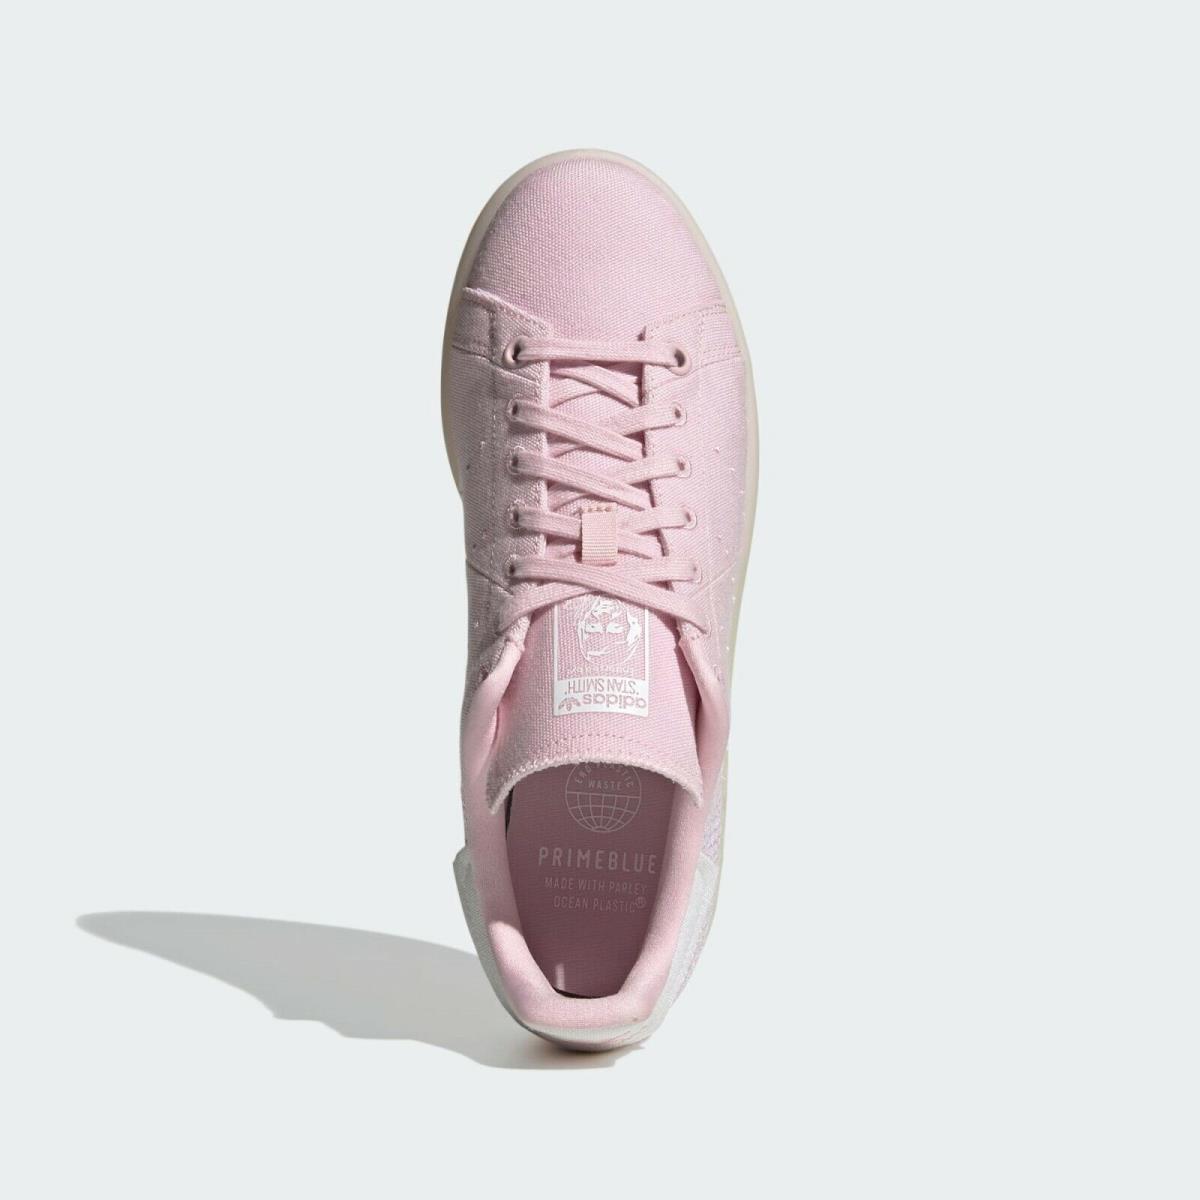 Adidas shoes STAN SMITH PRIMEBLUE - Clear Pink / Cloud White / Core Black 1